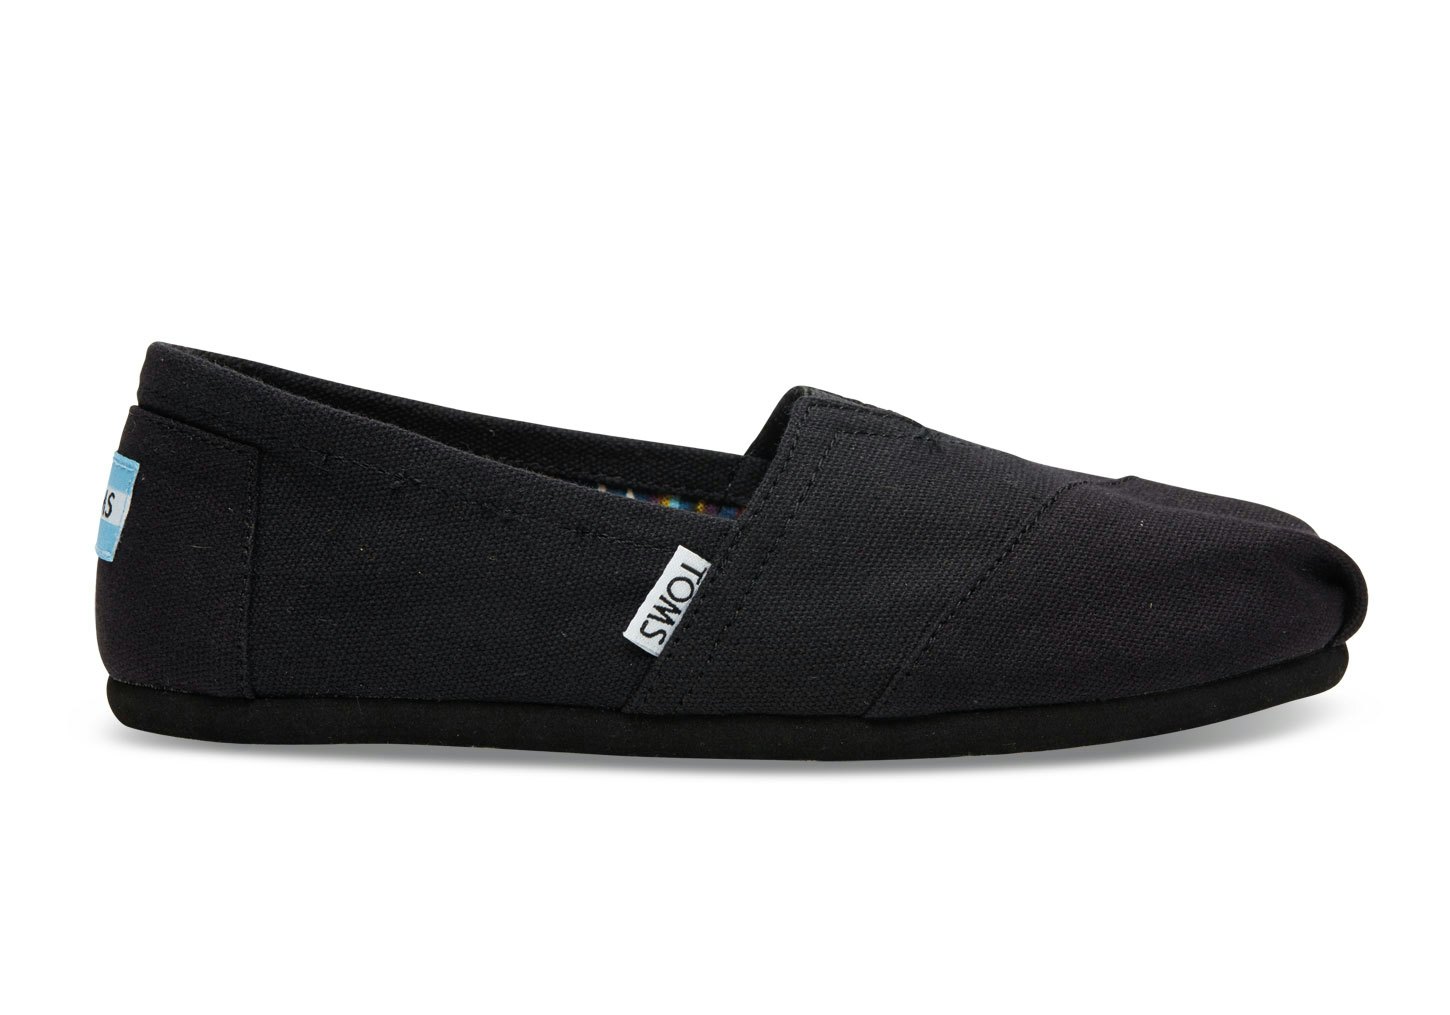 TOMS' Black Friday Sale Will Make You 